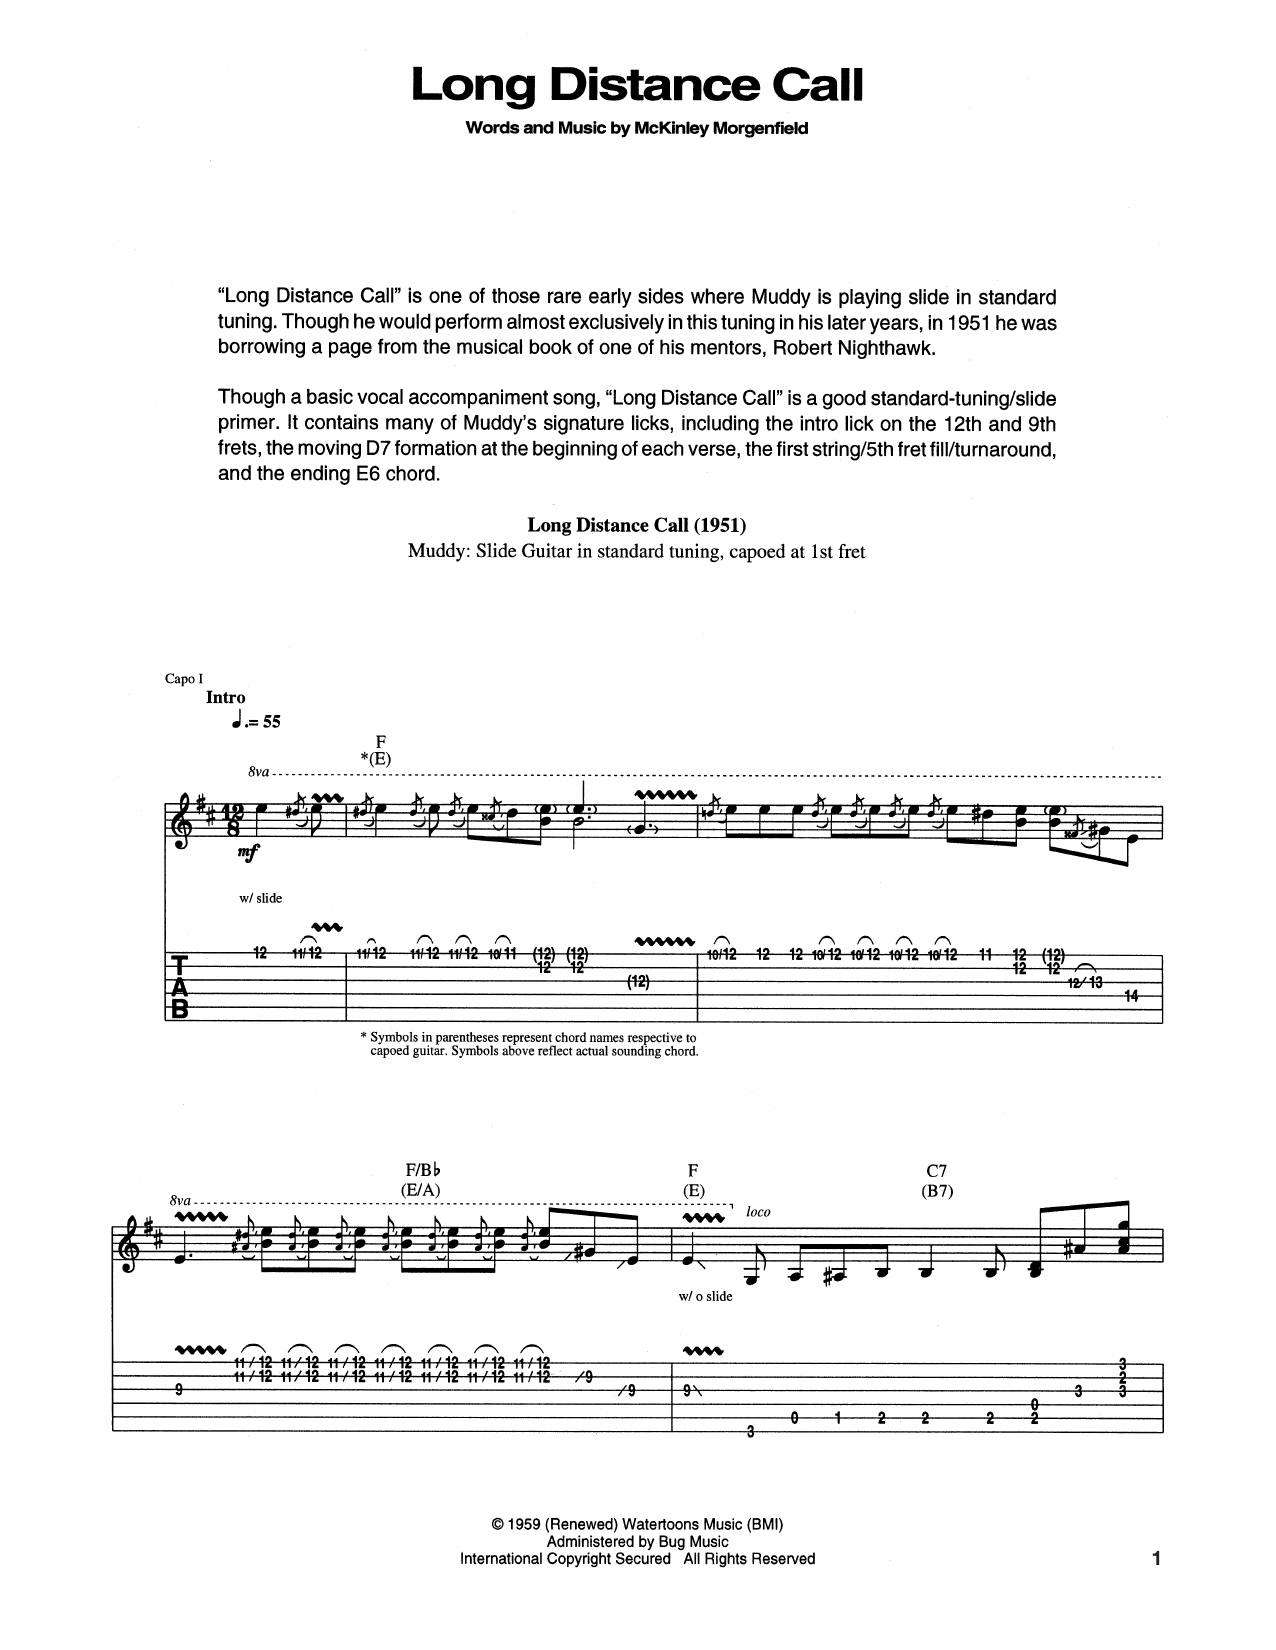 Download Muddy Waters Long Distance Call Sheet Music